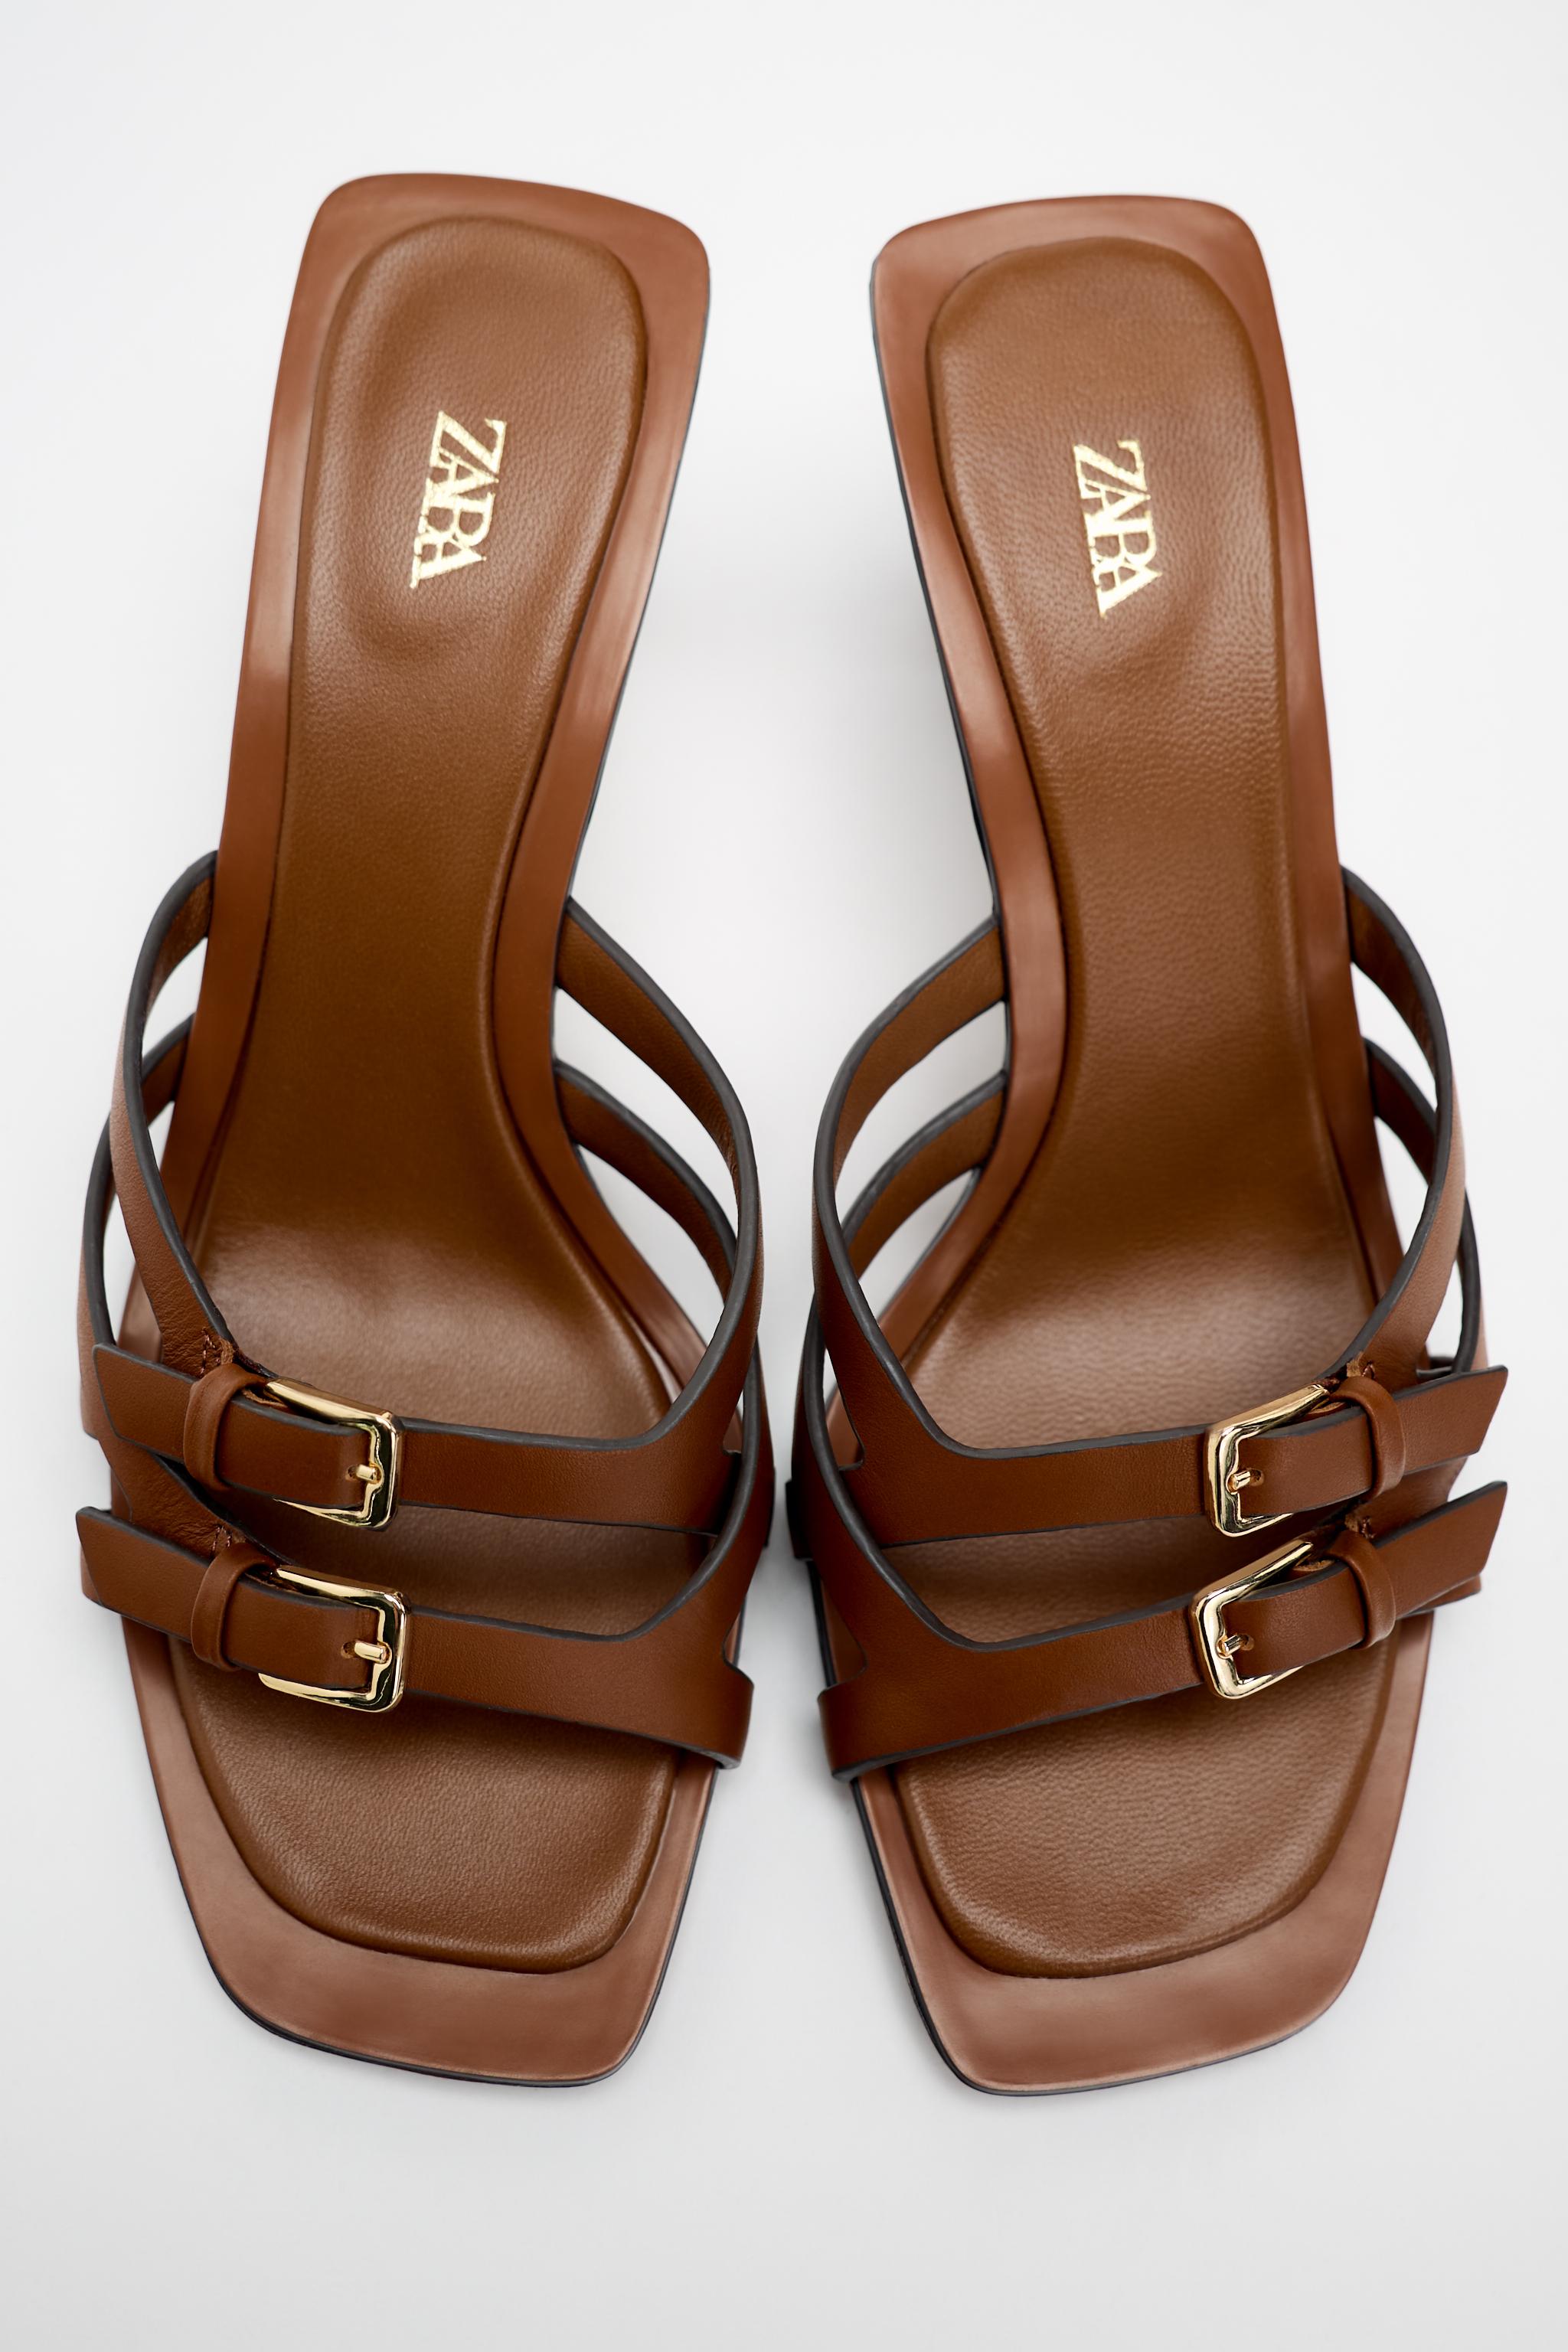 Women's Heeled Sandals, Explore our New Arrivals